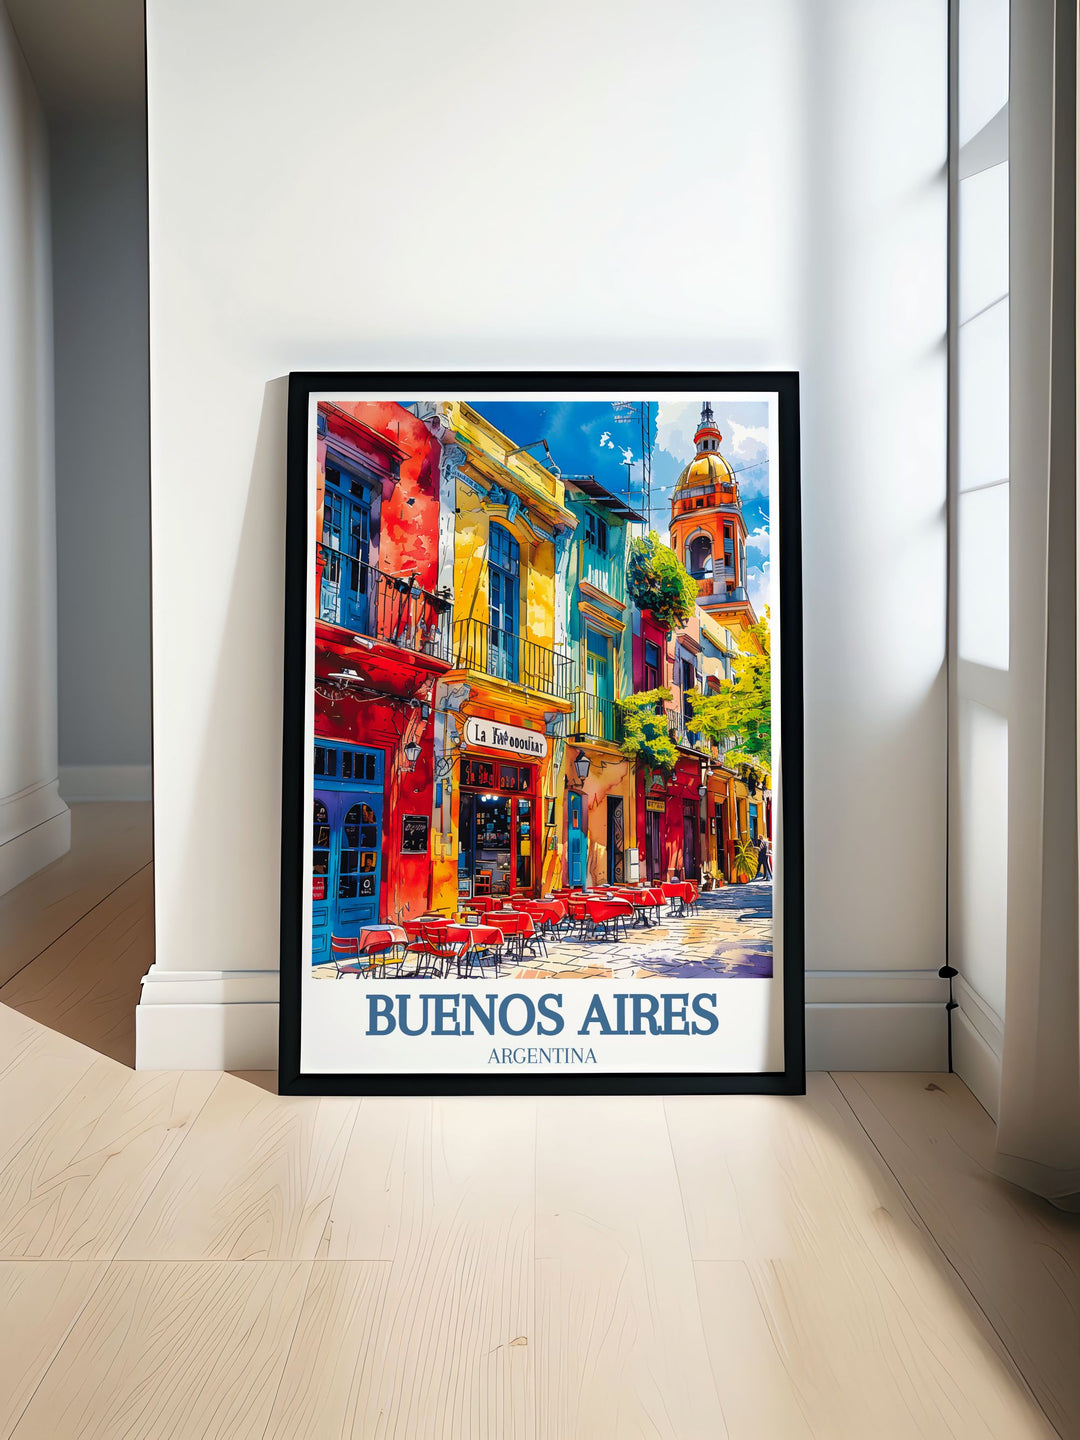 Illustrated with care, this travel poster brings to life the scenic beauty of Buenos Aires and the colorful charm of Caminito street, ideal for enhancing any room with Argentinas vibrant and diverse landscapes.